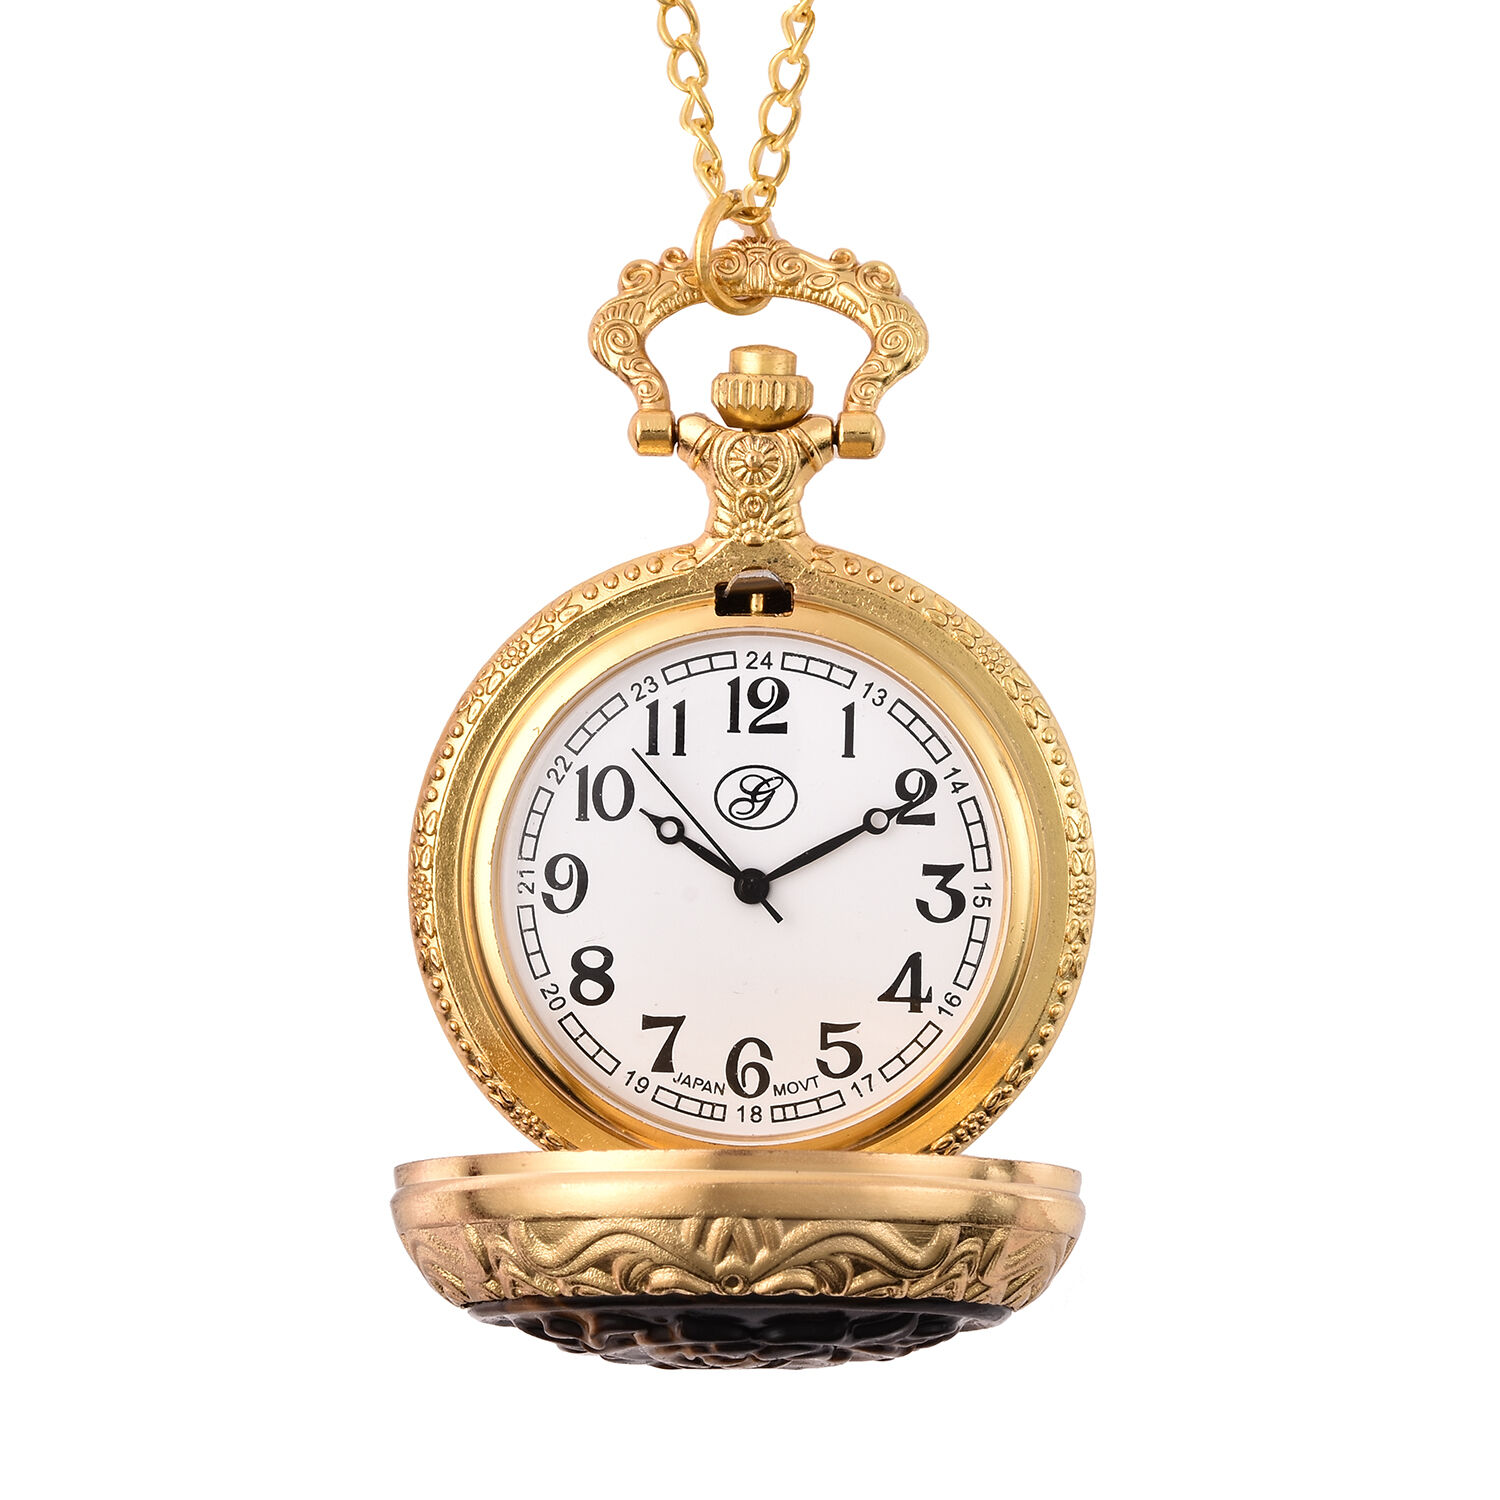 Vintage Turquoise Pearl Ruby Gold-Filled Pocket Watch Chain Jewellery Watches Watch Necklaces 